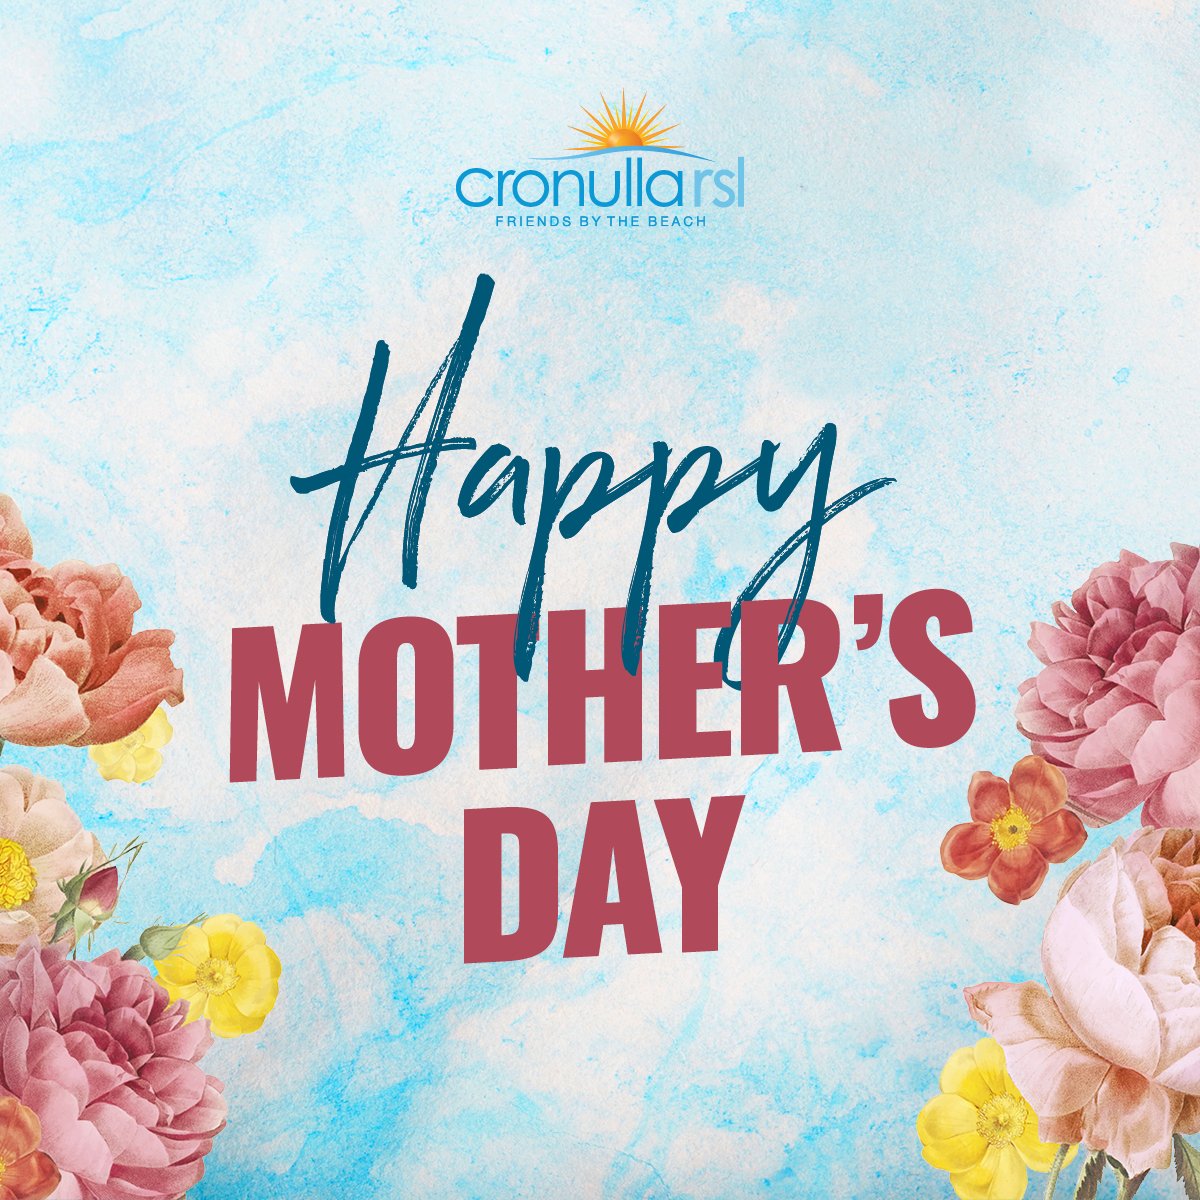 🌷🎉 Happy Mother's Day! 🎉🌷

Join us early and celebrate this special day with your loved ones! Let's make this Mother's Day memorable together. See you soon!

#mothersday #celebration #happymothersday #cronullarsl #cronulla